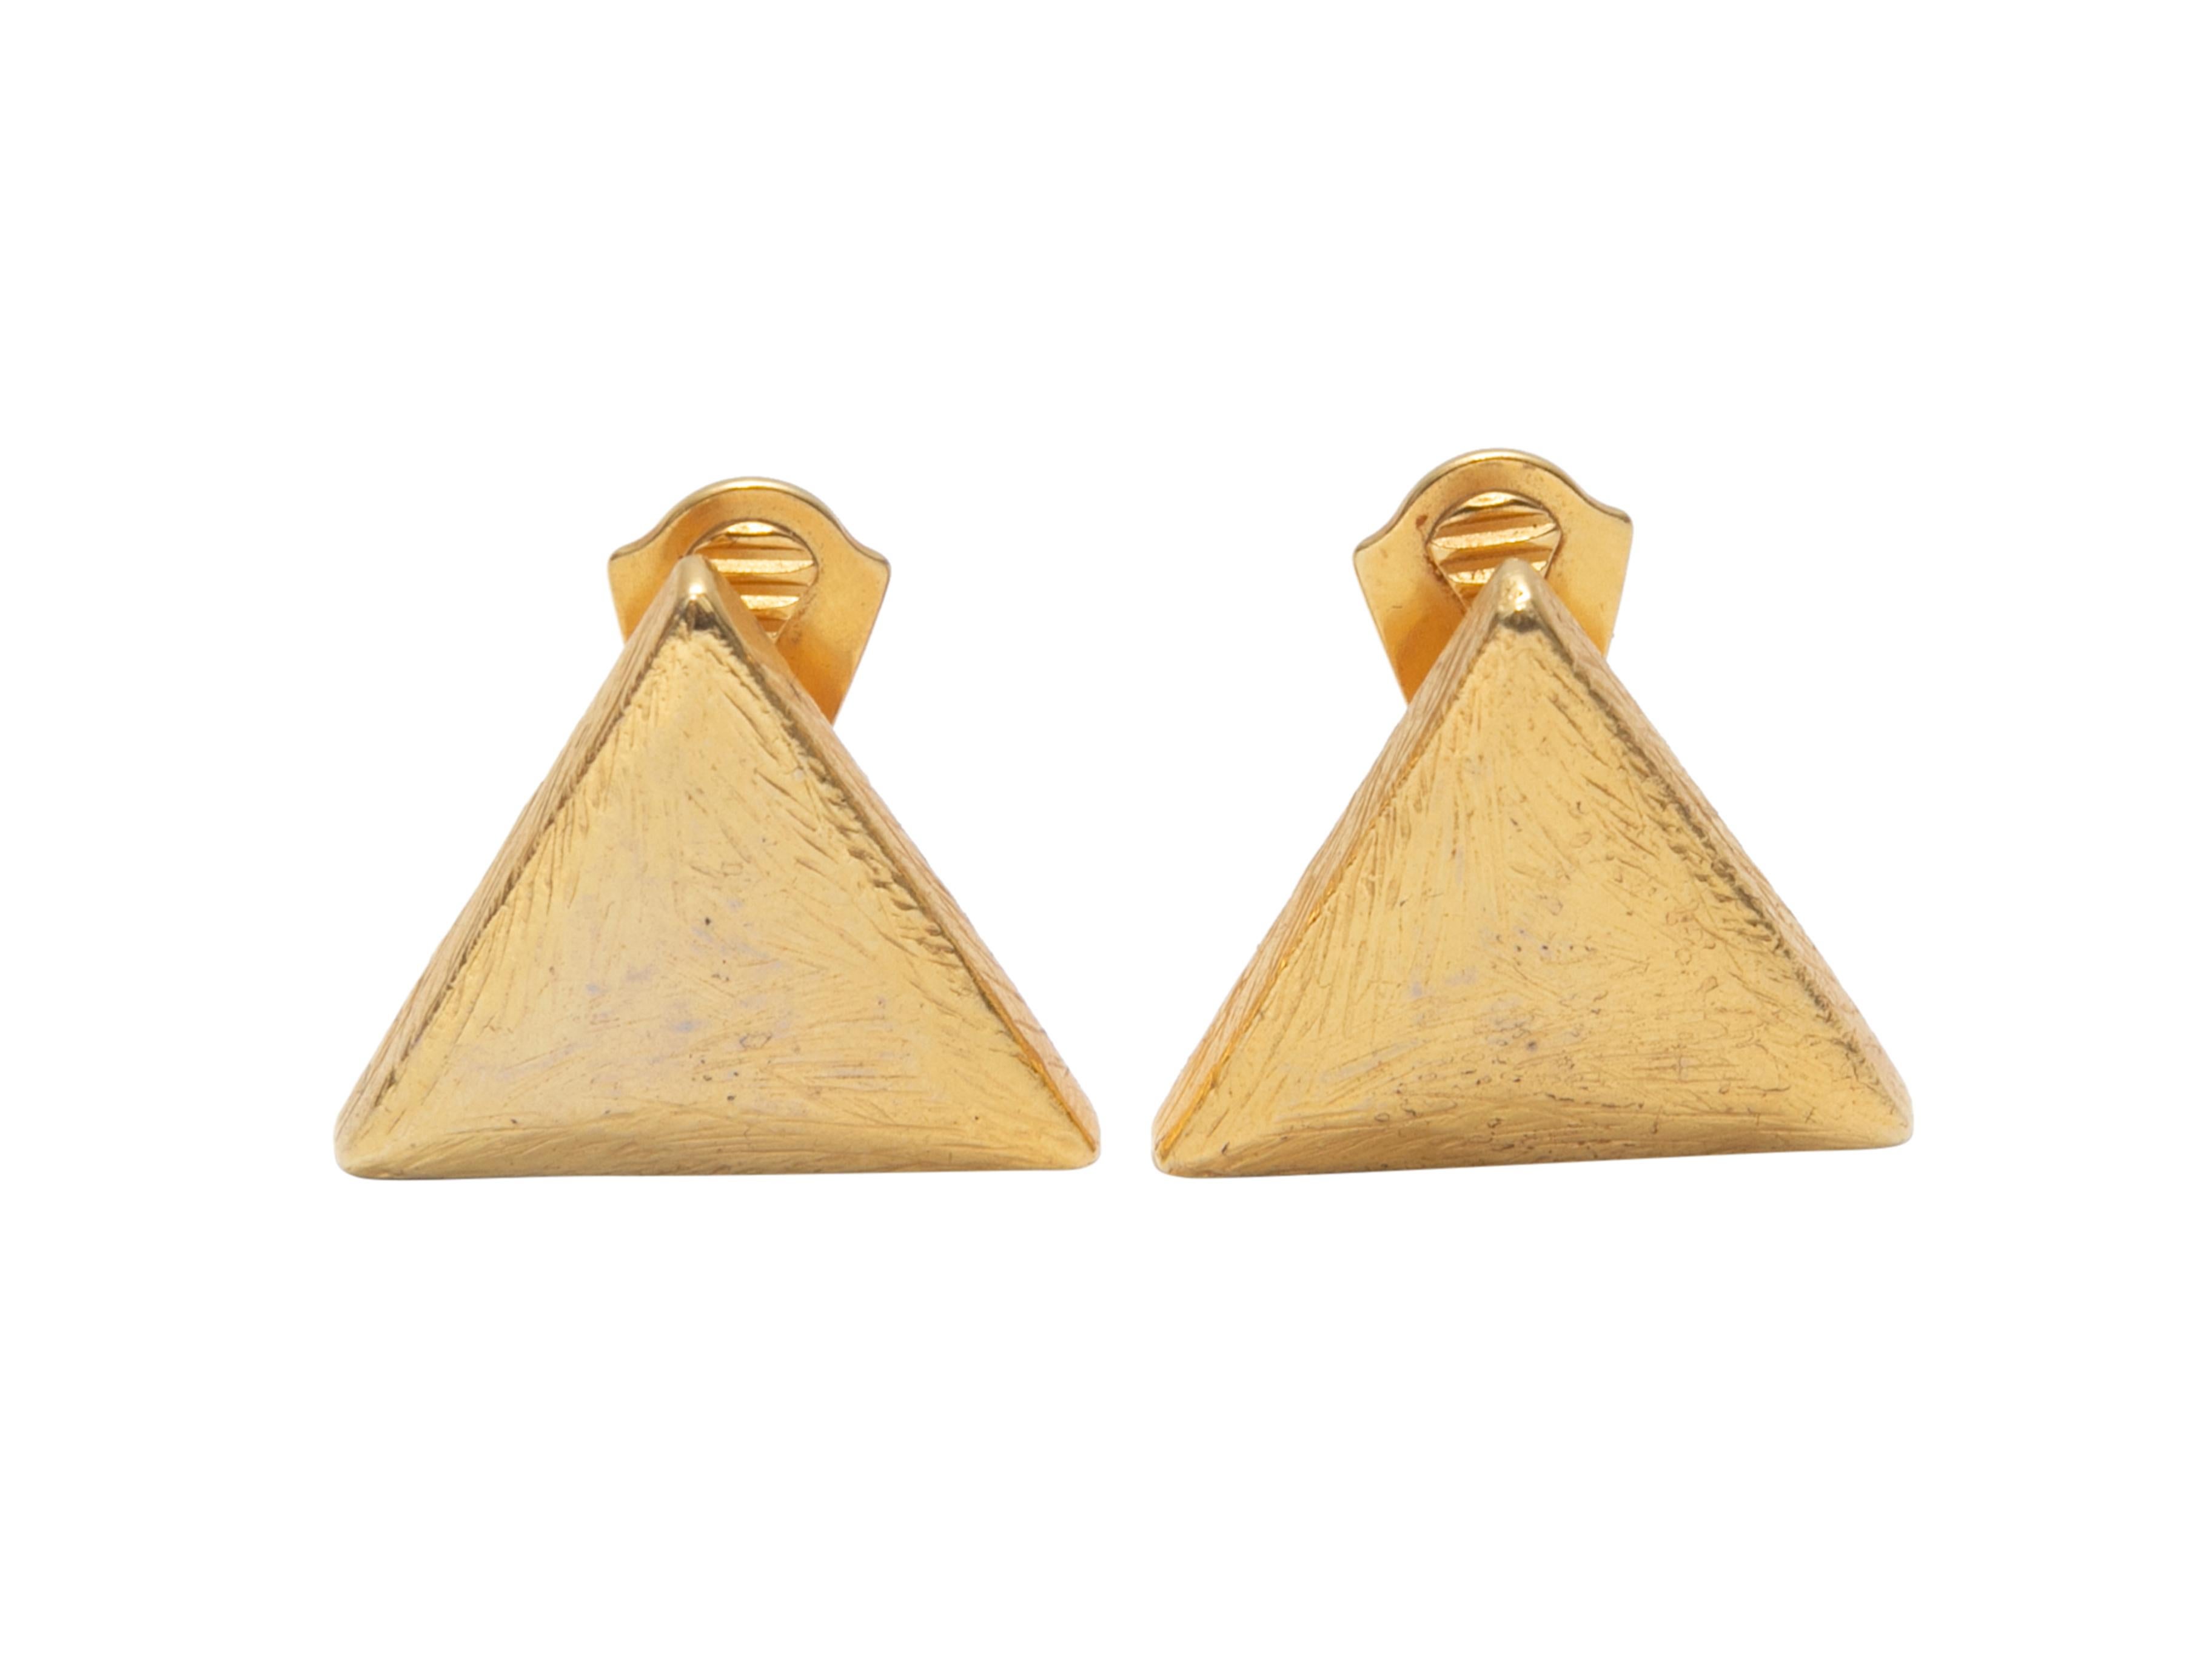 Vintage Gold-Tone Yves Saint Laurent Triangular Clip-On Earrings In Good Condition For Sale In New York, NY